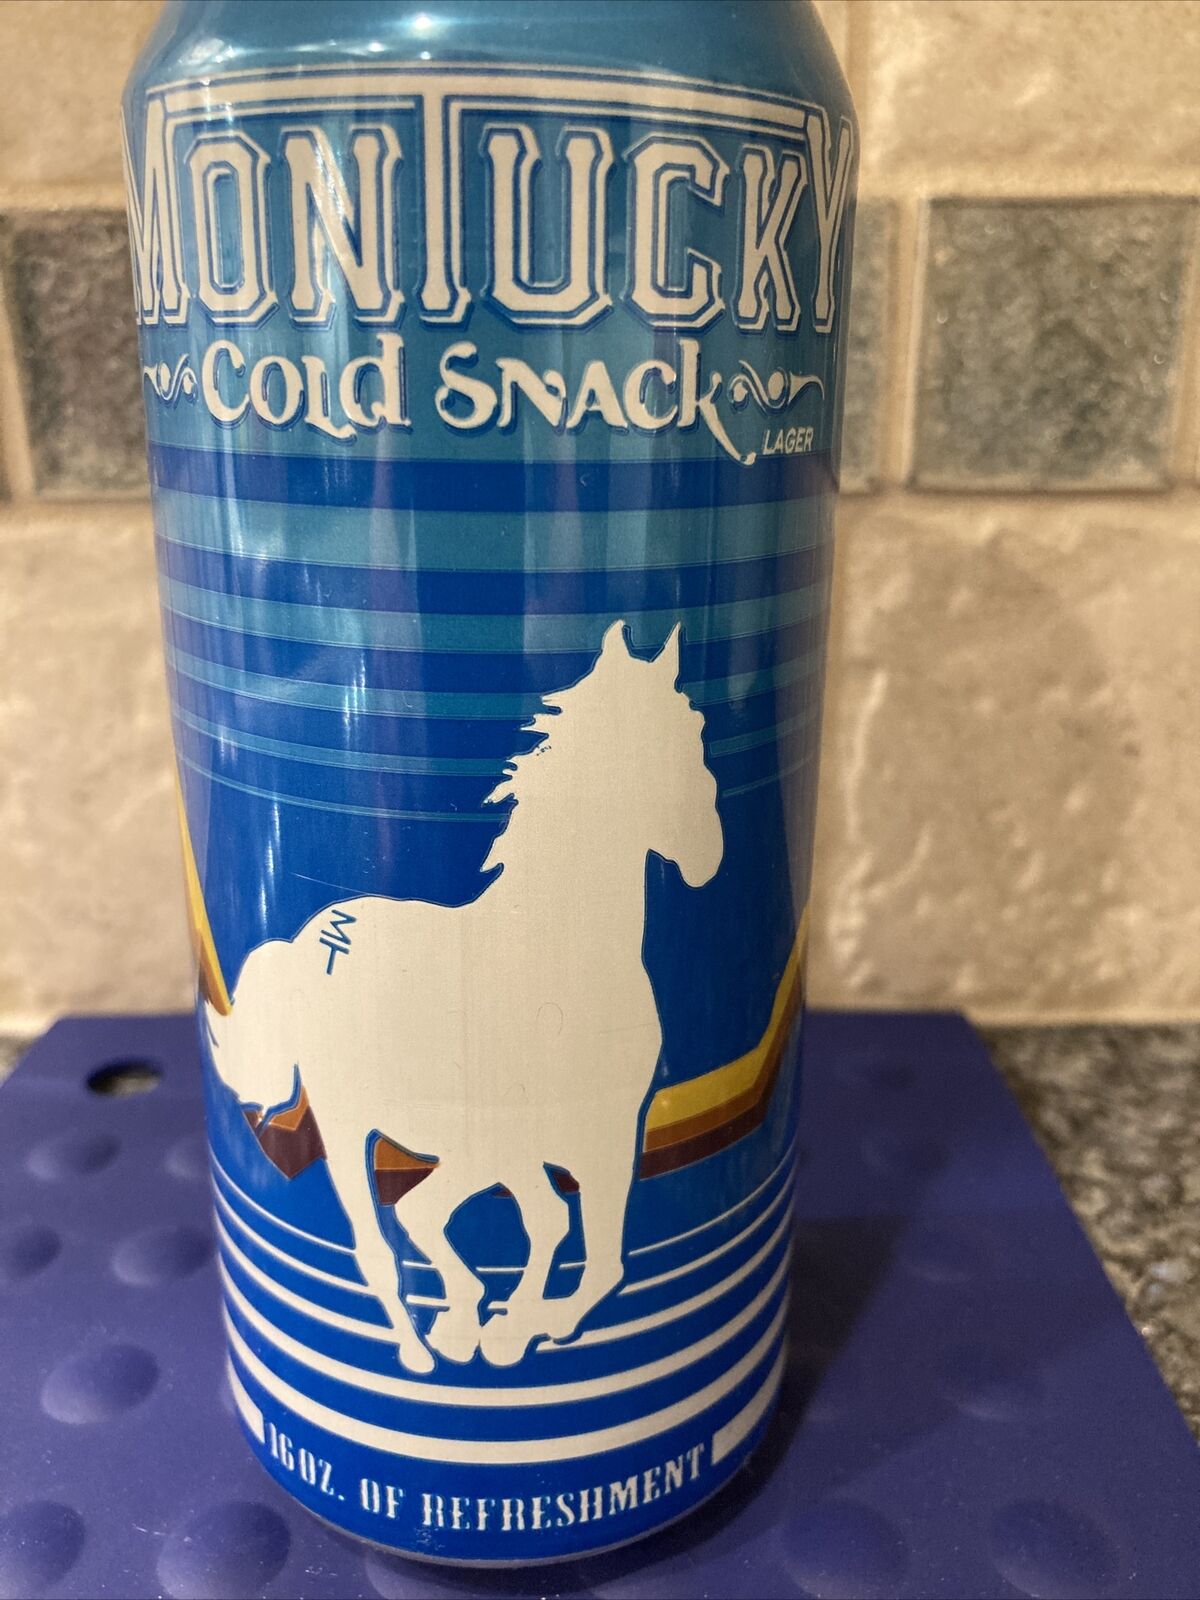 16oz Montucky Cold Snack Beer Can